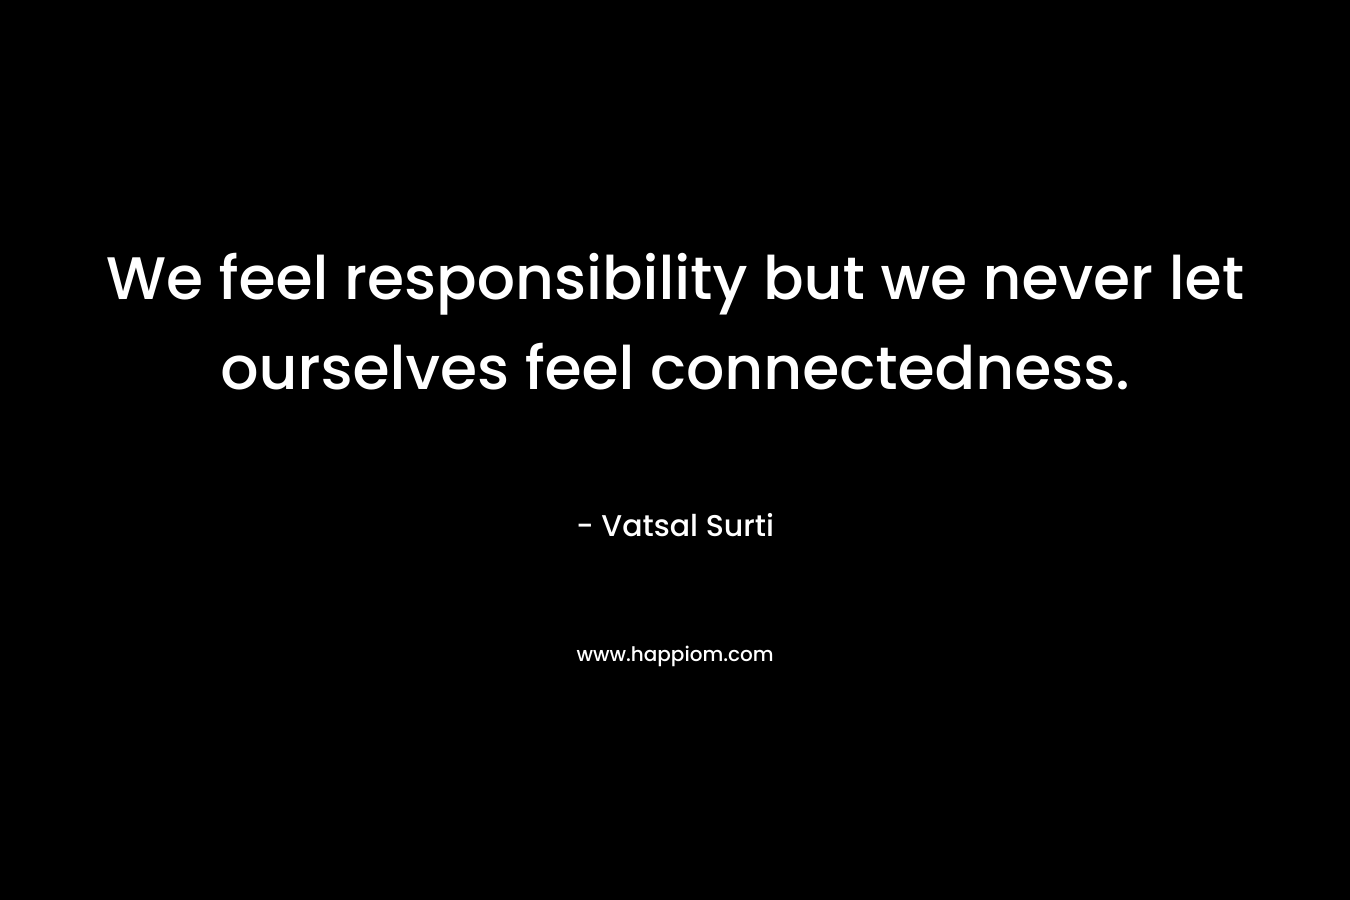 We feel responsibility but we never let ourselves feel connectedness. – Vatsal Surti